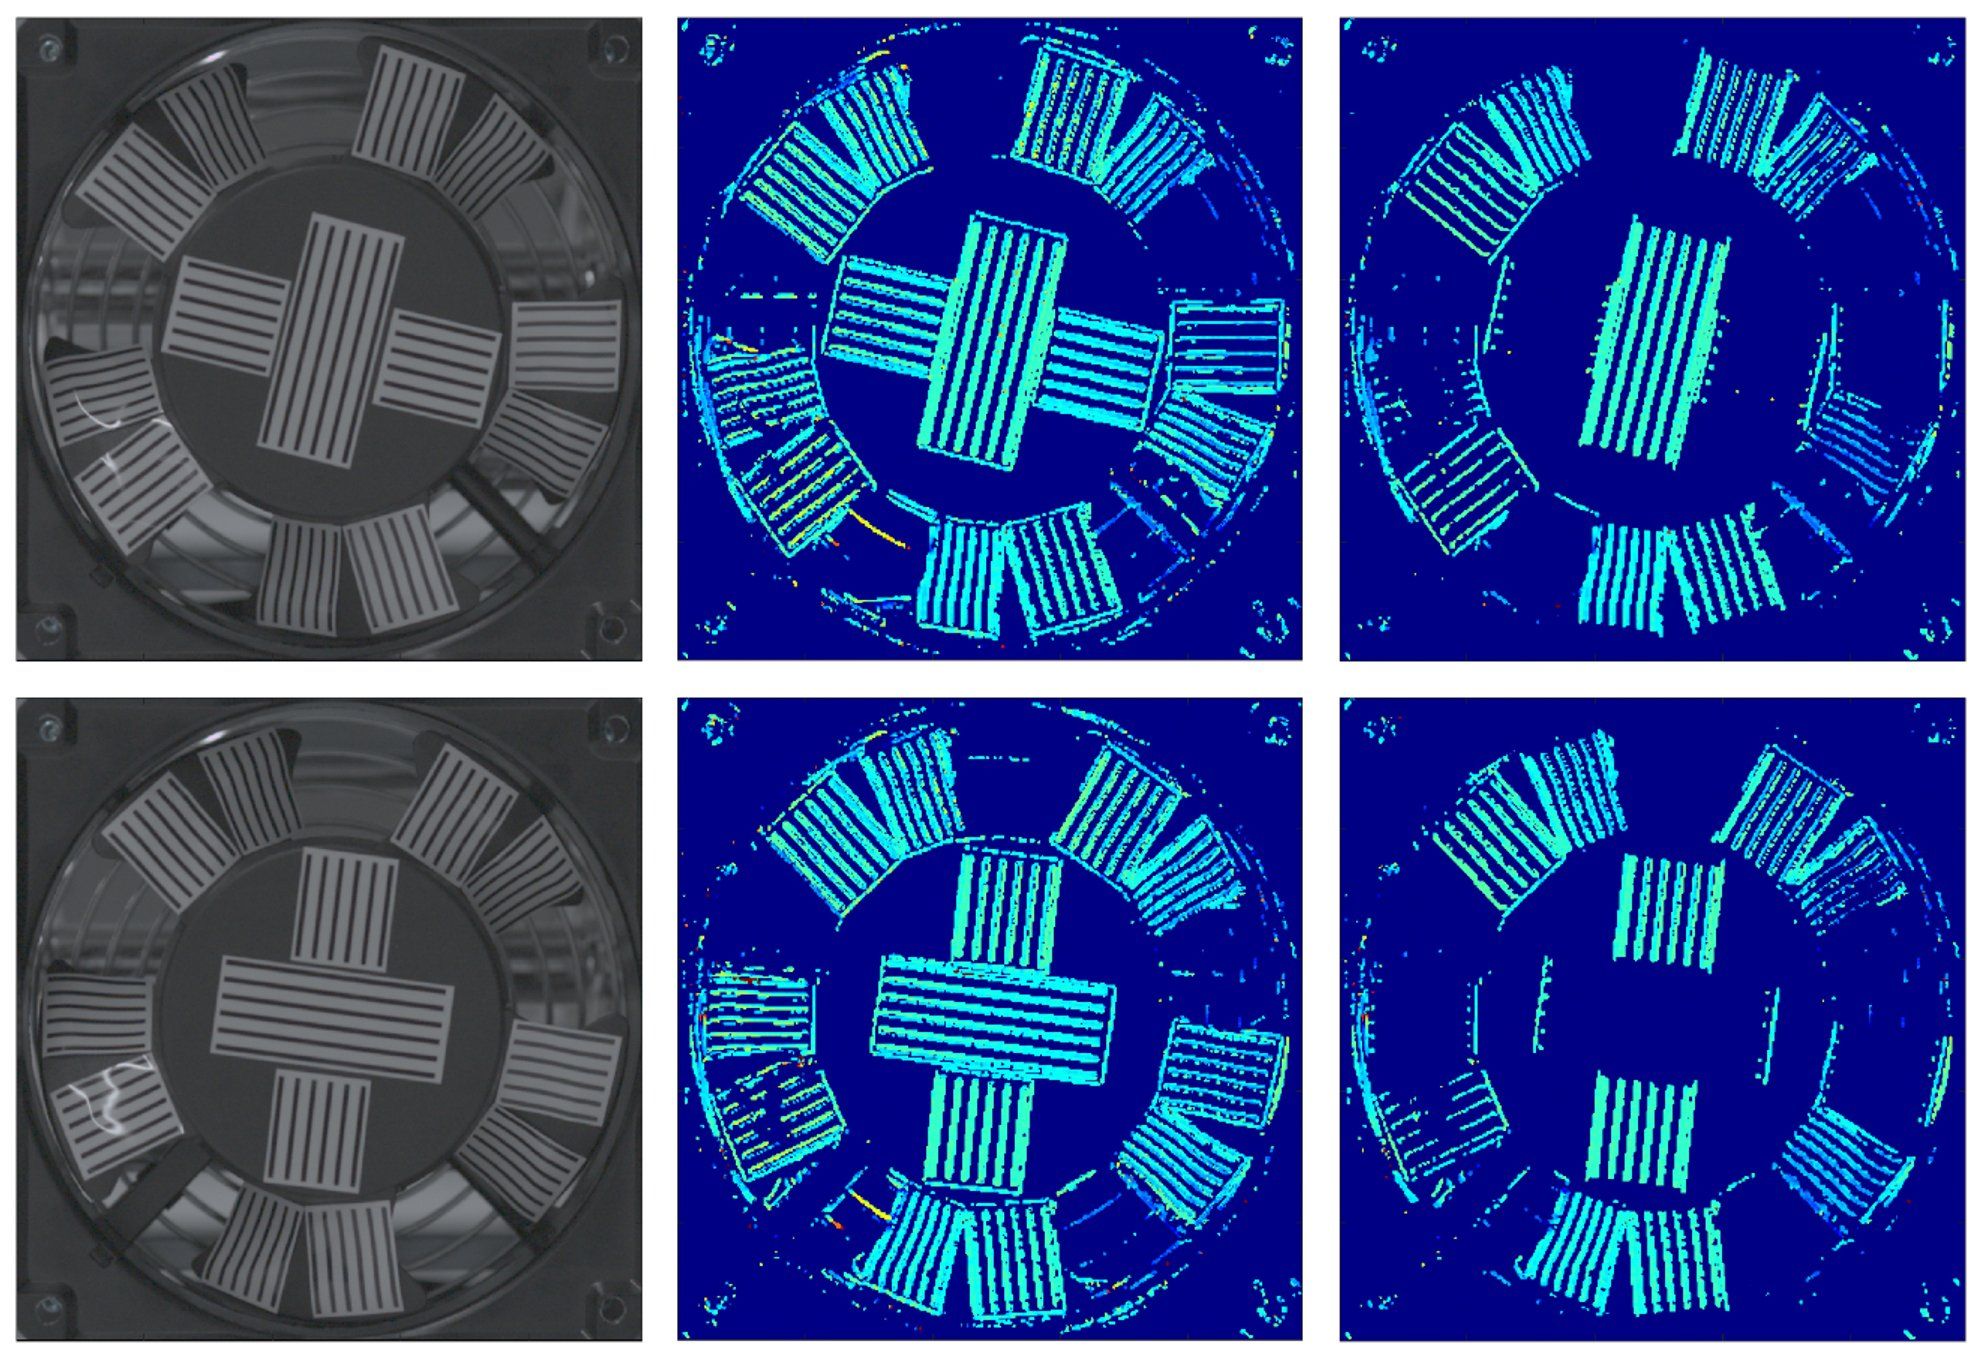 A set of six micrographs, two black and white and four colorized.